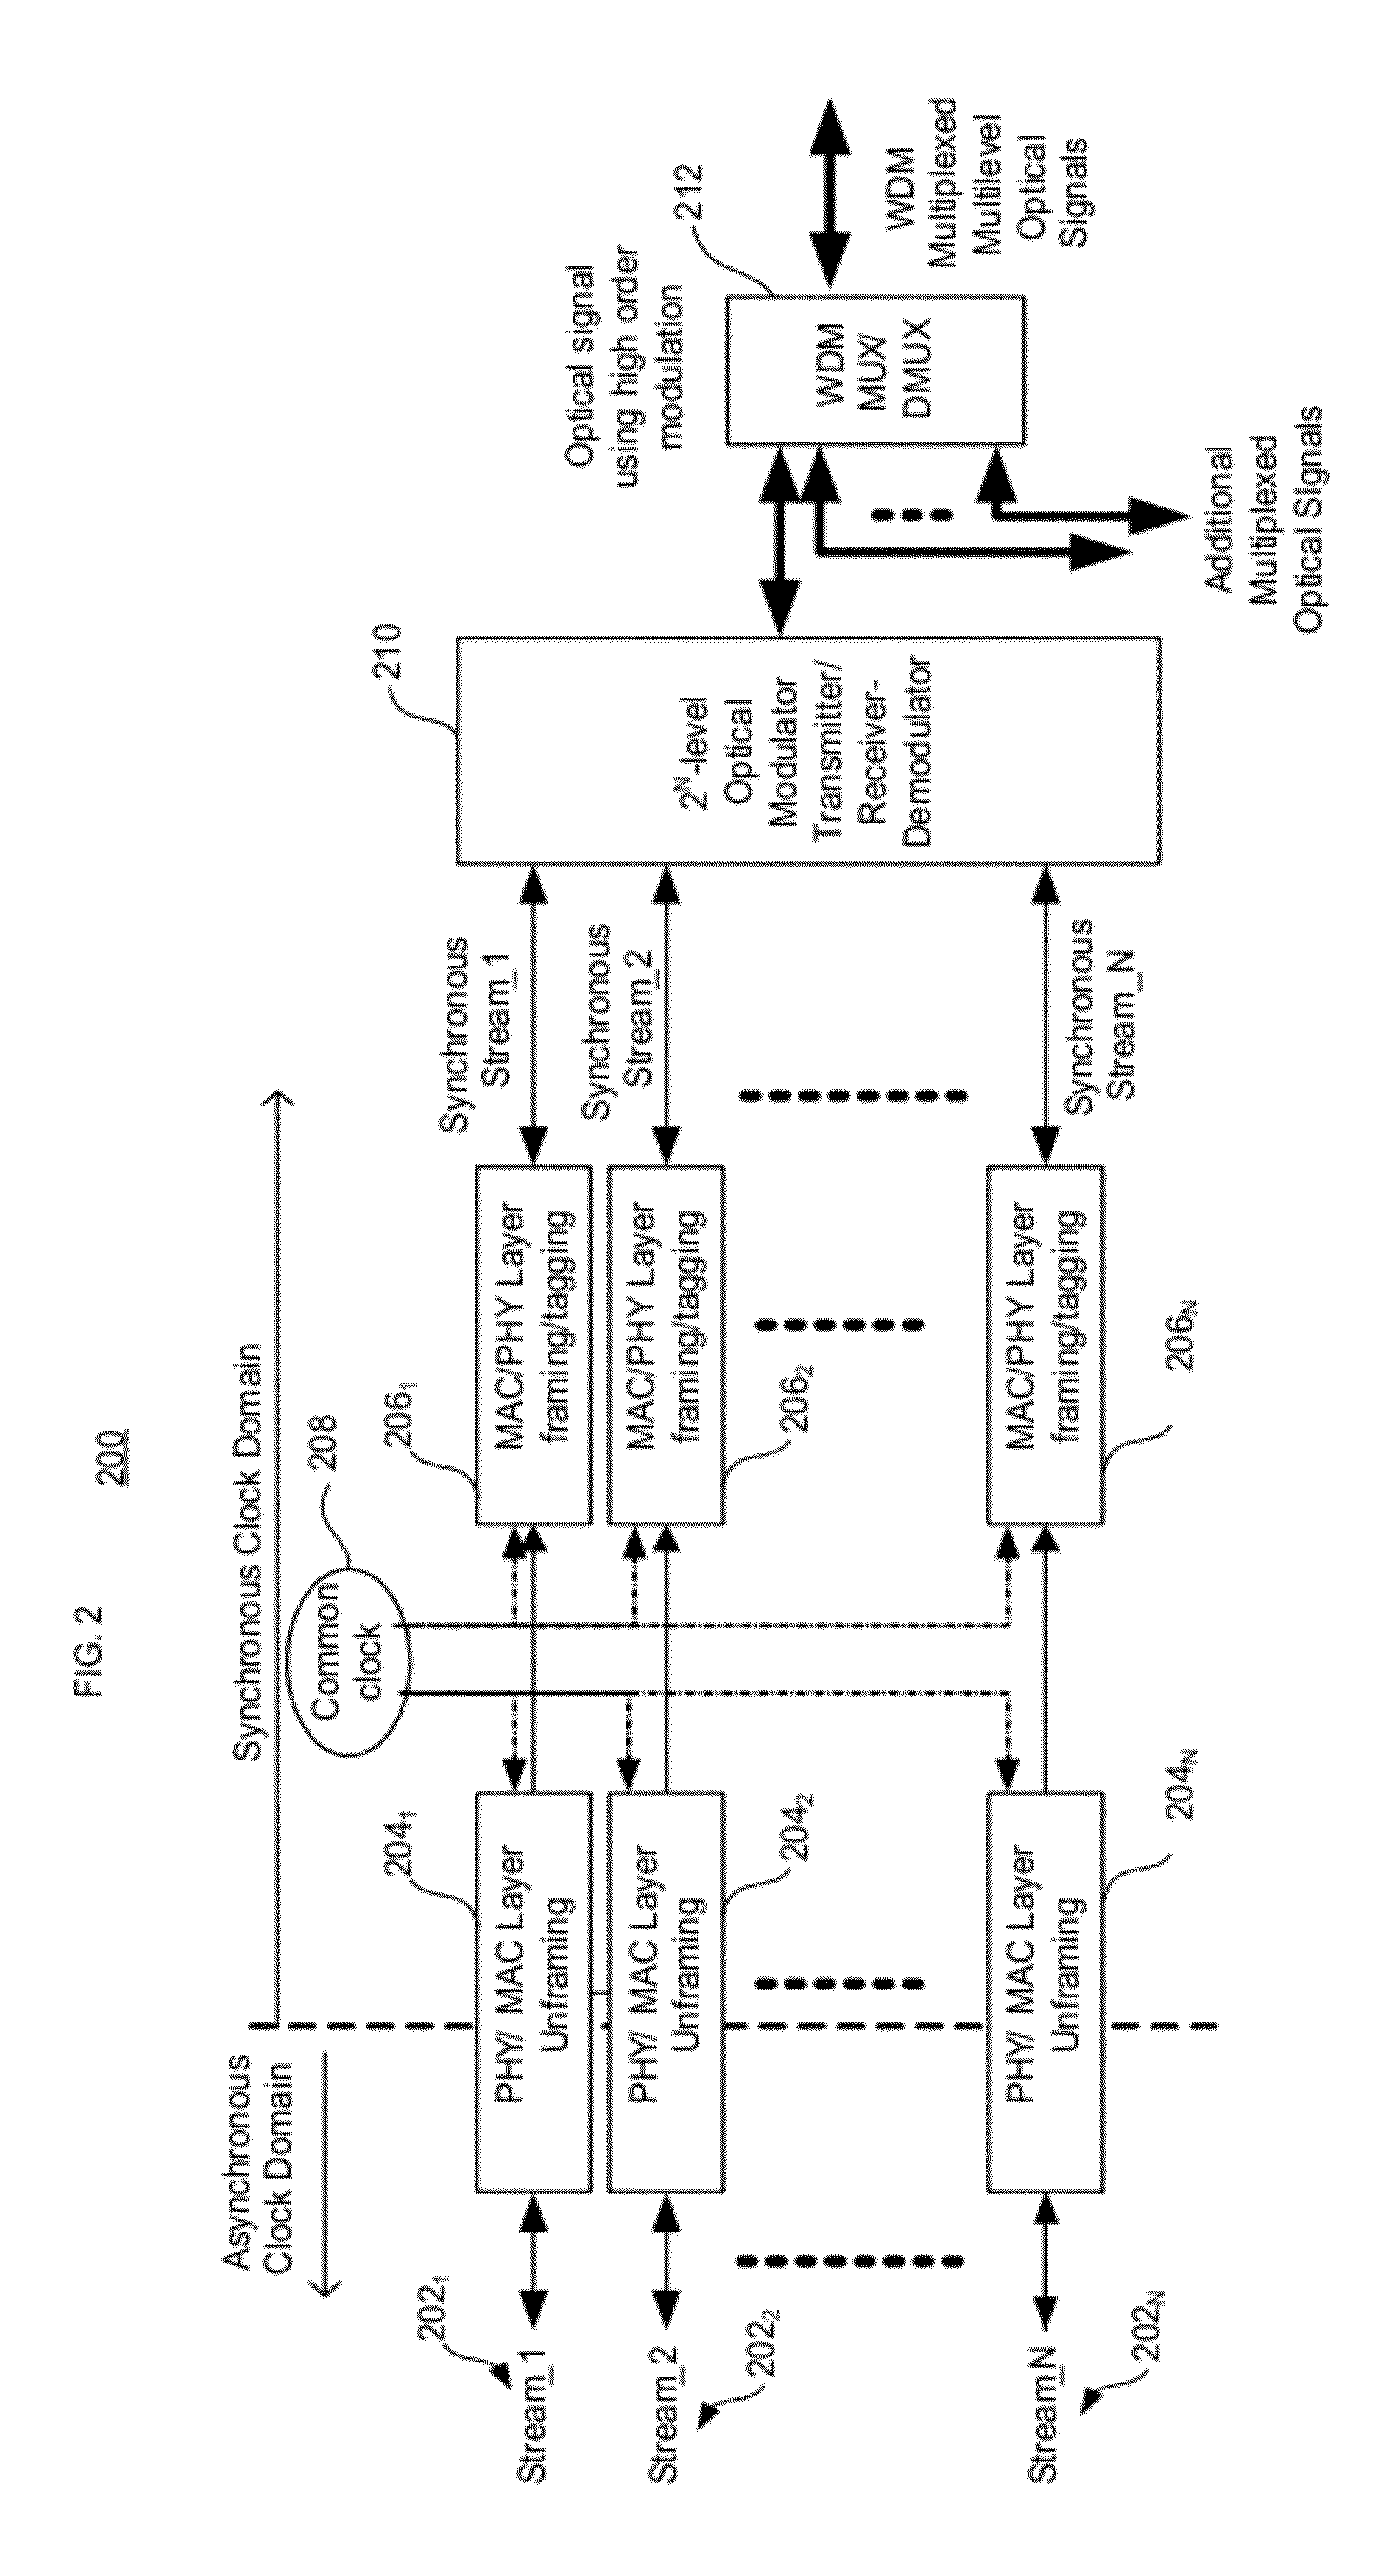 Transport of multiple asynchronous data streams using higher order modulation